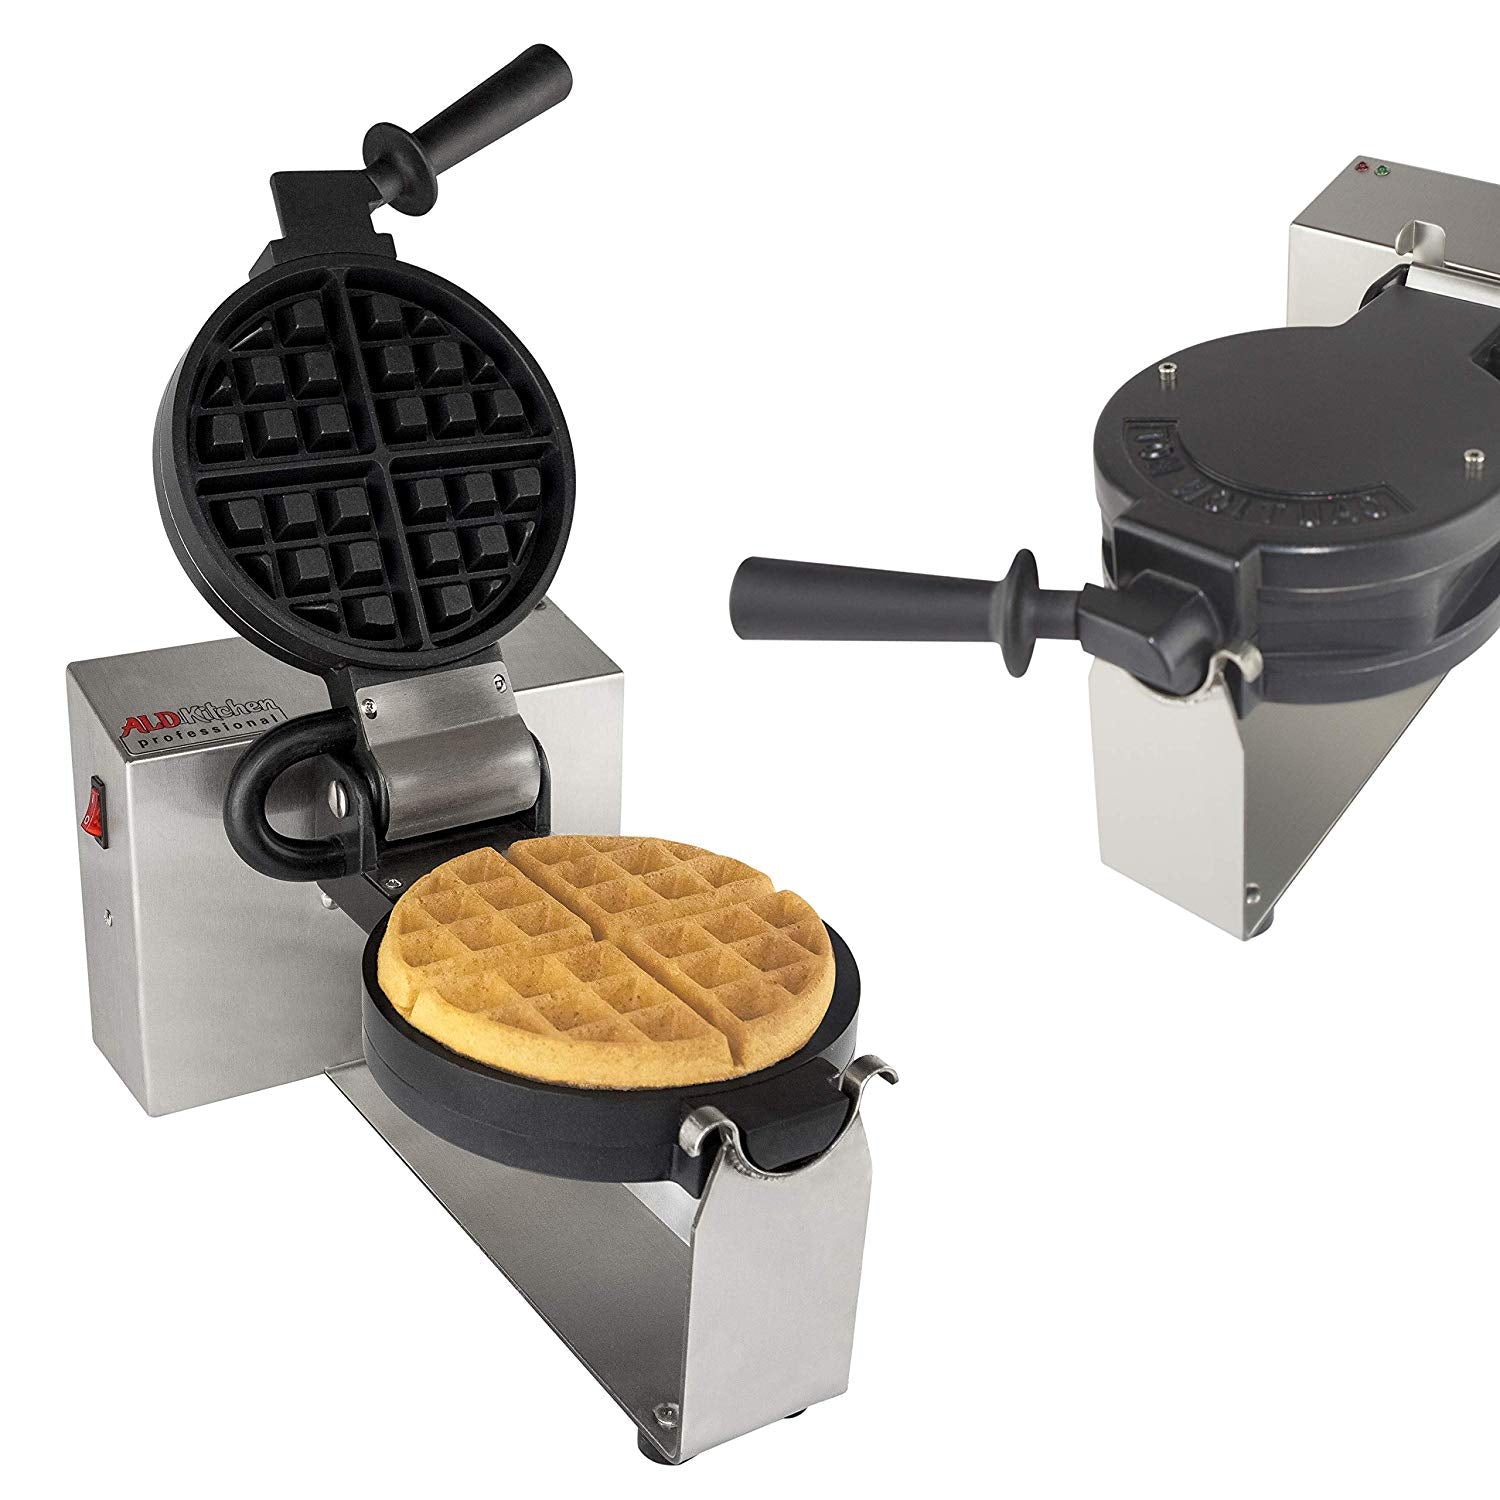 ALDKitchen Belgian Waffle Iron Press Type Professional Use Stainless Steel Nonstick 110V (6 Waffle on a Stick) - 2